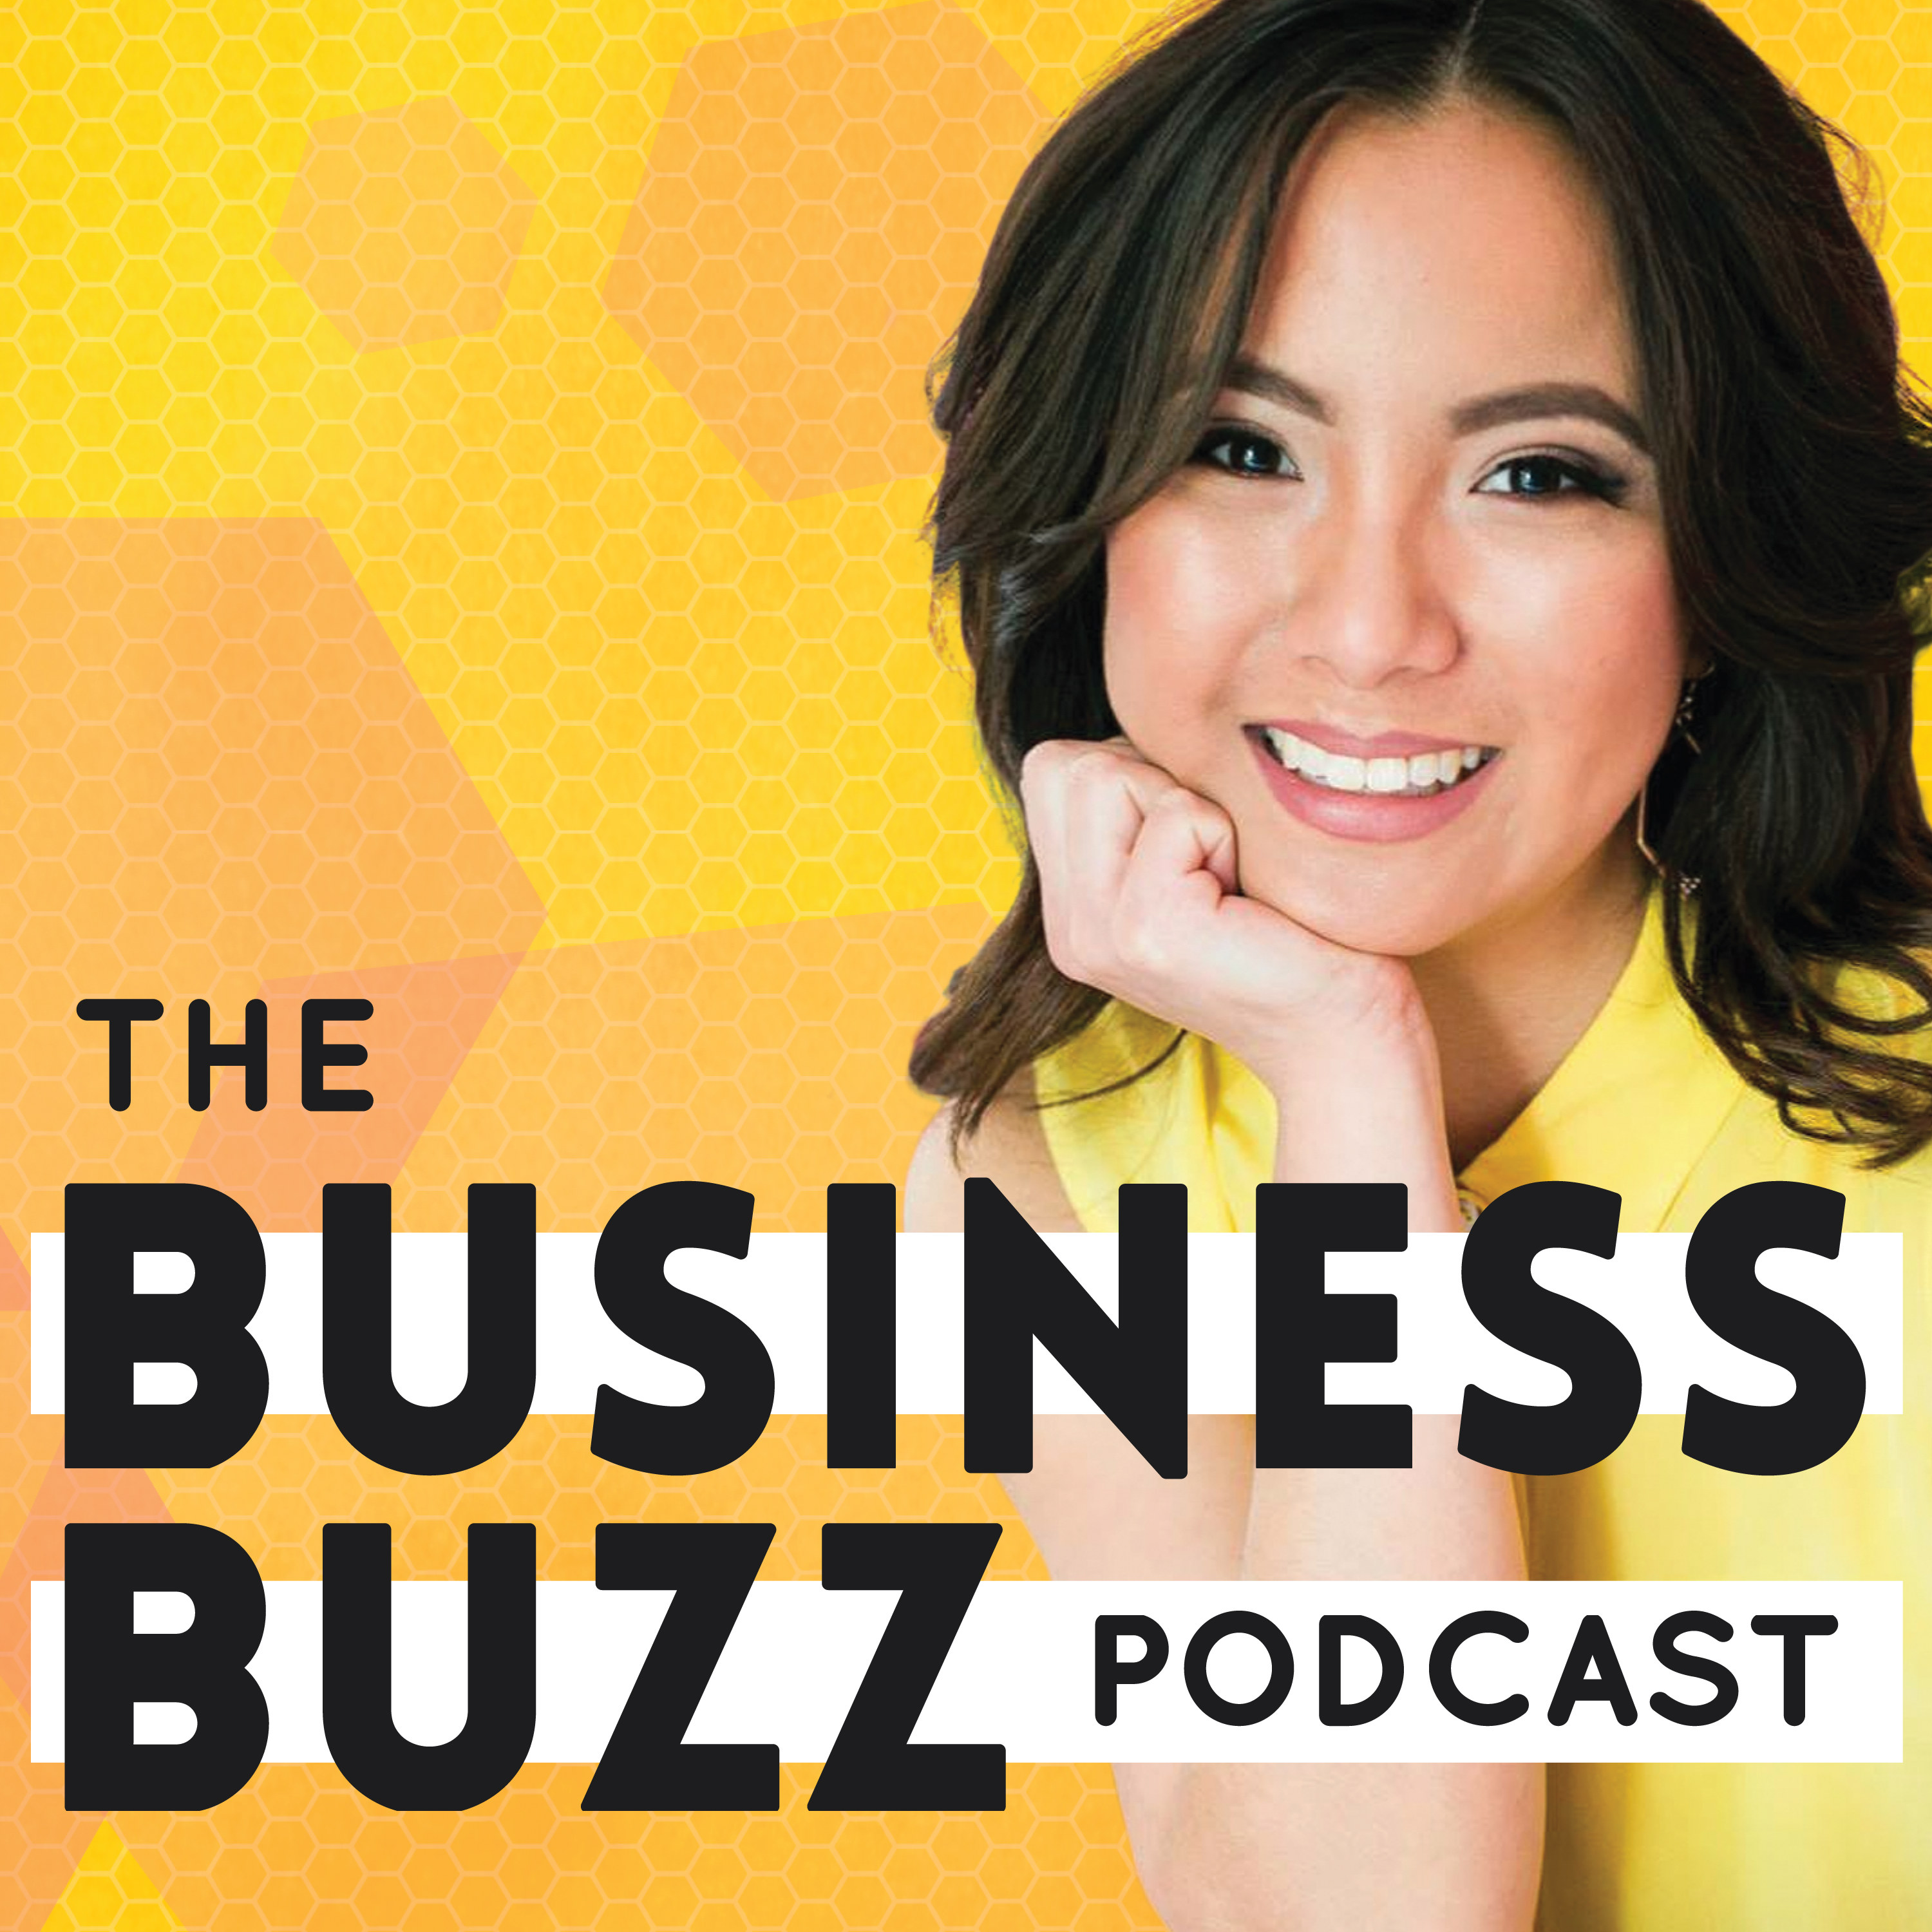 The Business Buzz Podcast For Makers, Artists & Designers: Helping Your Handmade Business Make A Consistent Income